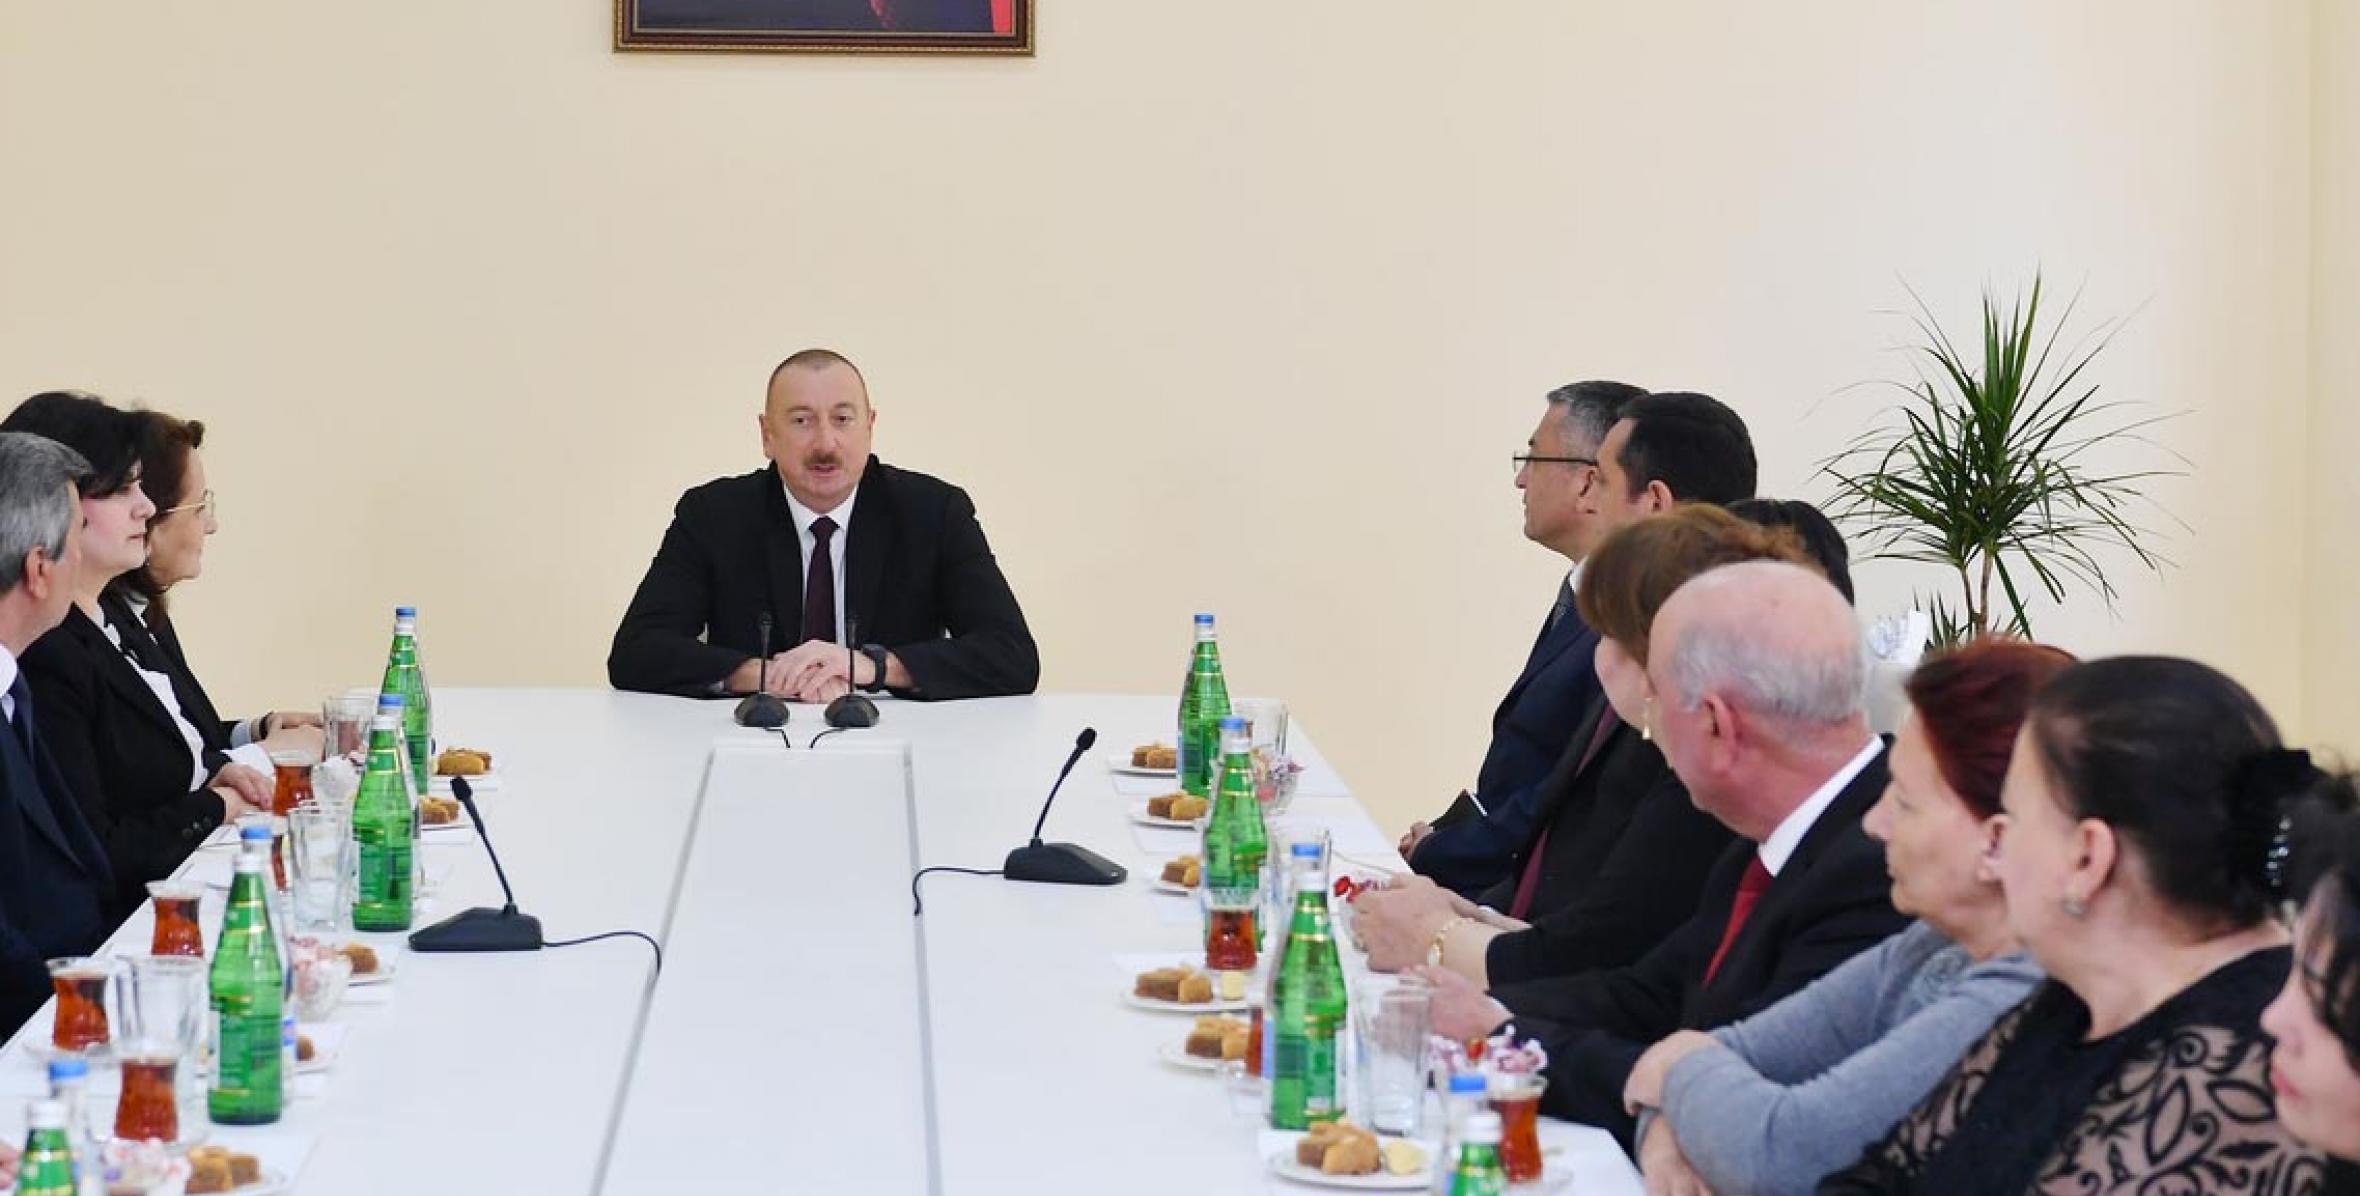 Speech by Ilham Aliyev at the opening of new residential complex for IDP families in Kurdakhani settlement, Baku